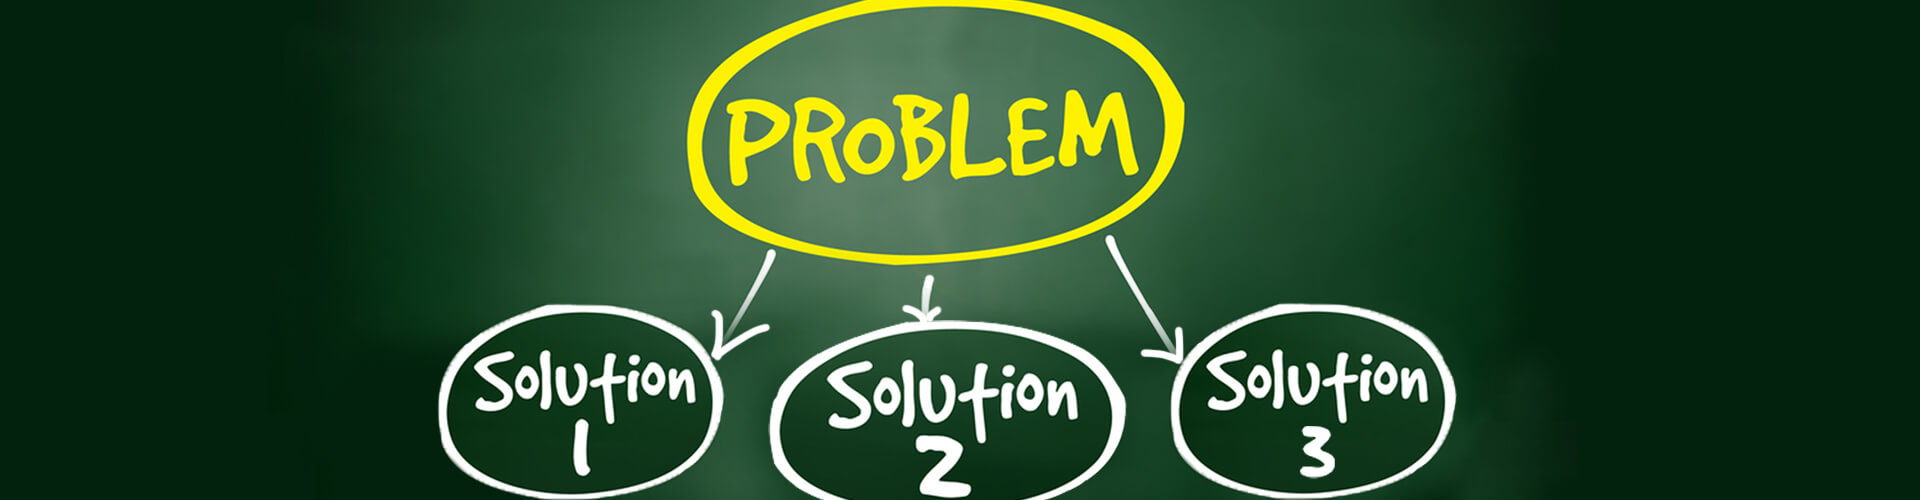 facts and characteristics of problem solving